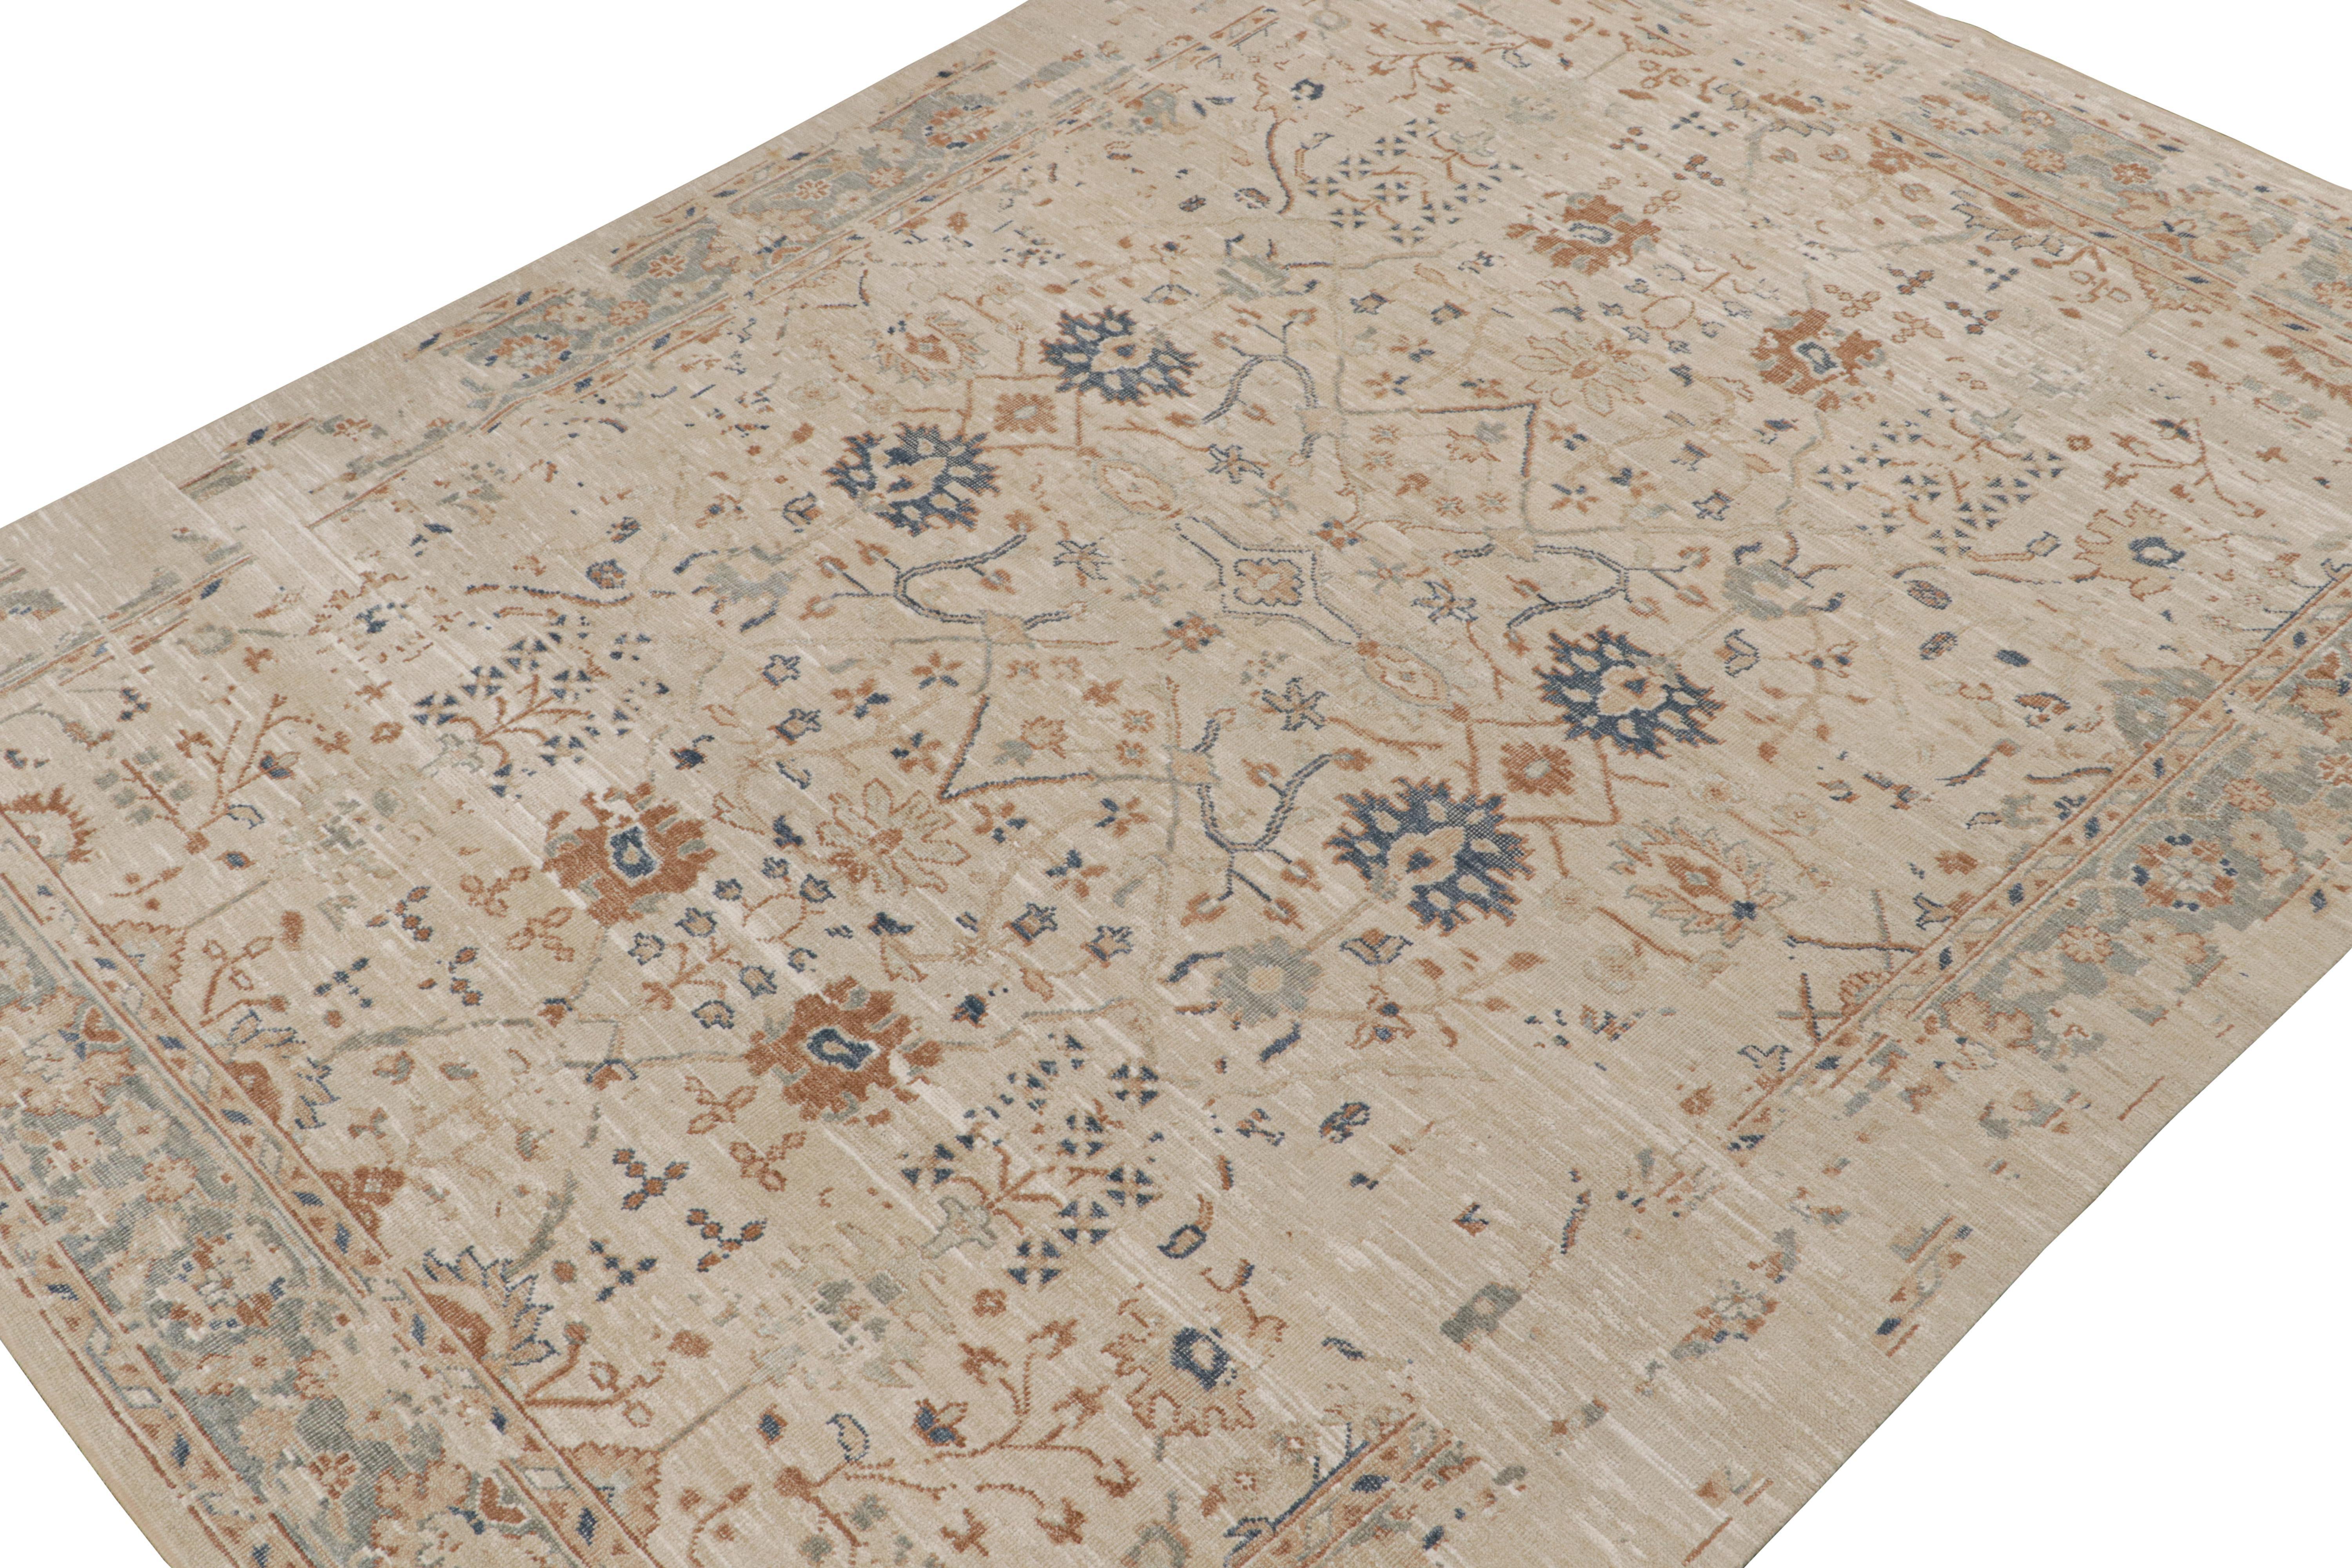 This 9x12 rug is inspired by antique Oushak rugs—from a bold new Modern Classics Collection by Rug & Kilim. Hand-knotted in silk, it enjoys taupe and beige-brown undertones with tribal motifs and floral patterns in rust tones and navy blue. 

On the